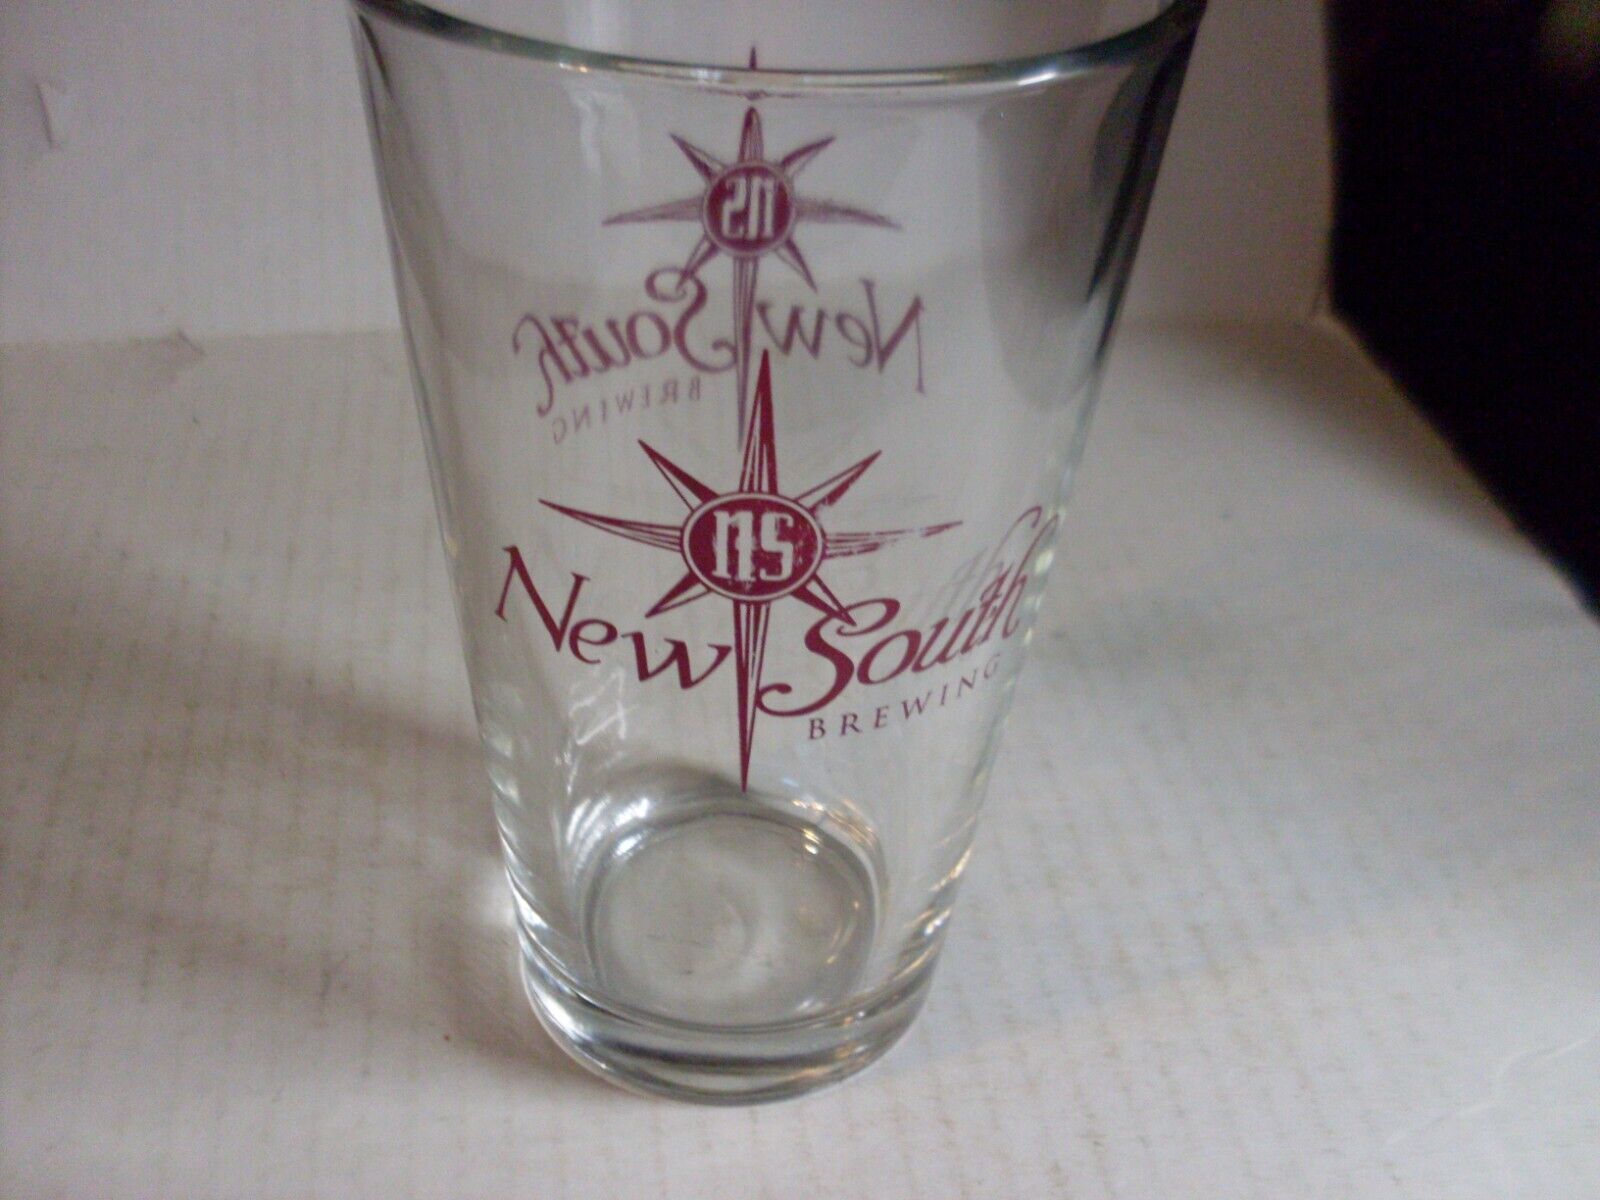 New South Brewing Pint Beer Glass